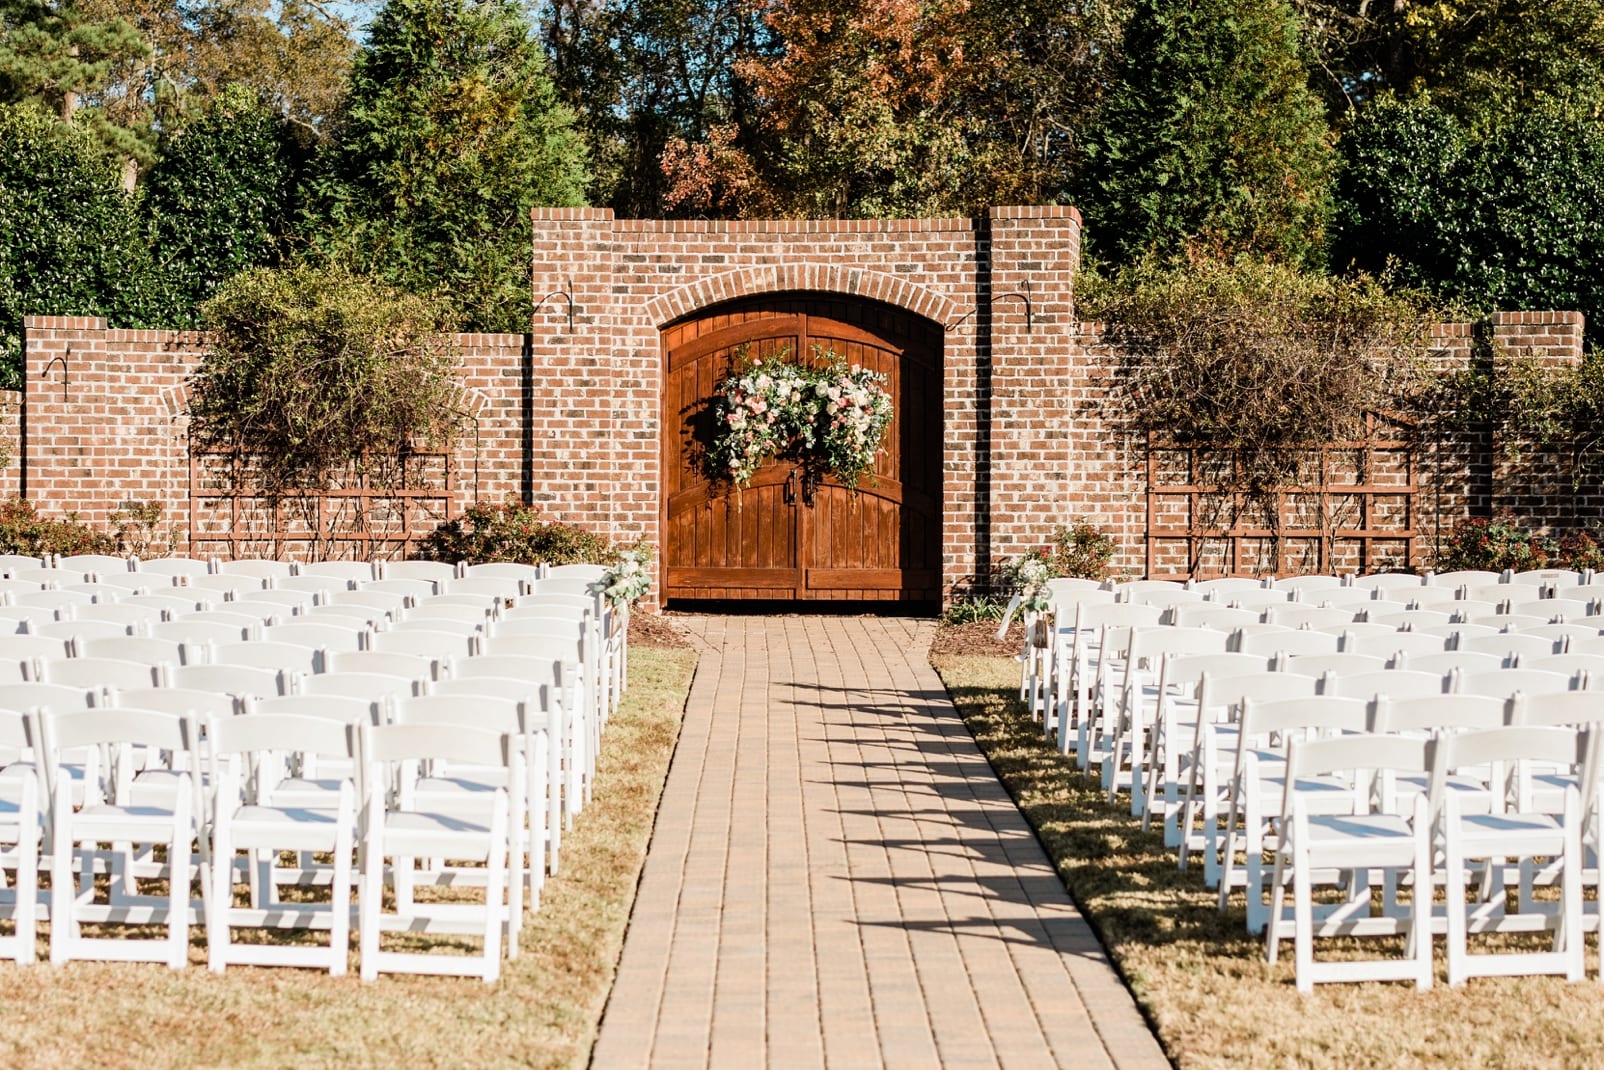 Oaks at Salem wedding ceremony in front of a red brick wall with wooden doors in the center photo